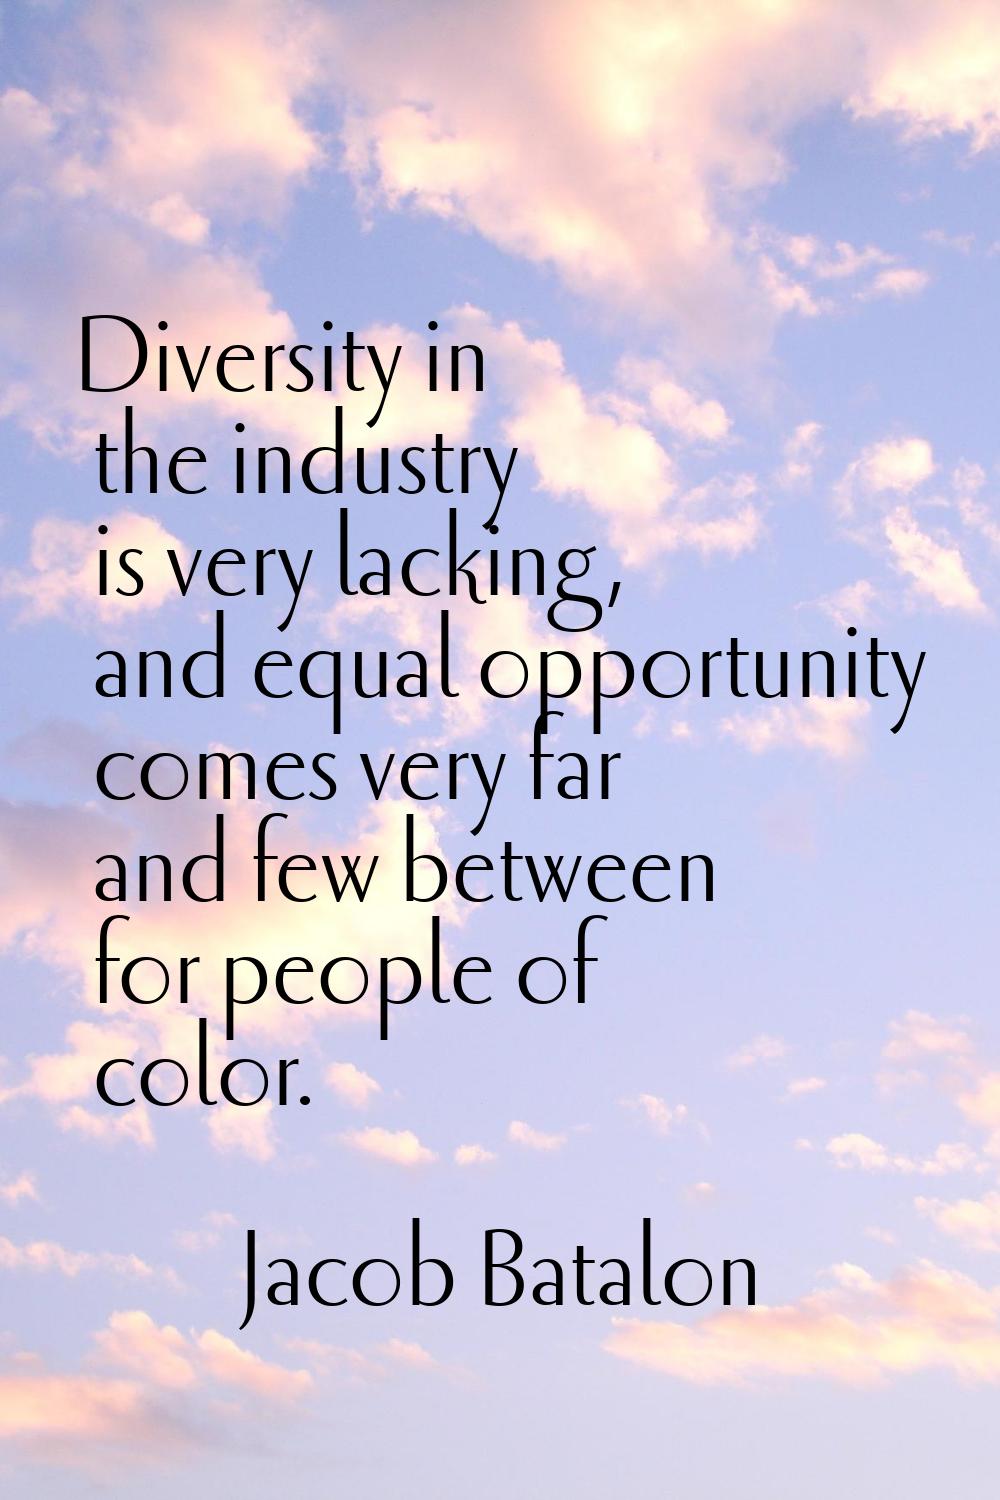 Diversity in the industry is very lacking, and equal opportunity comes very far and few between for